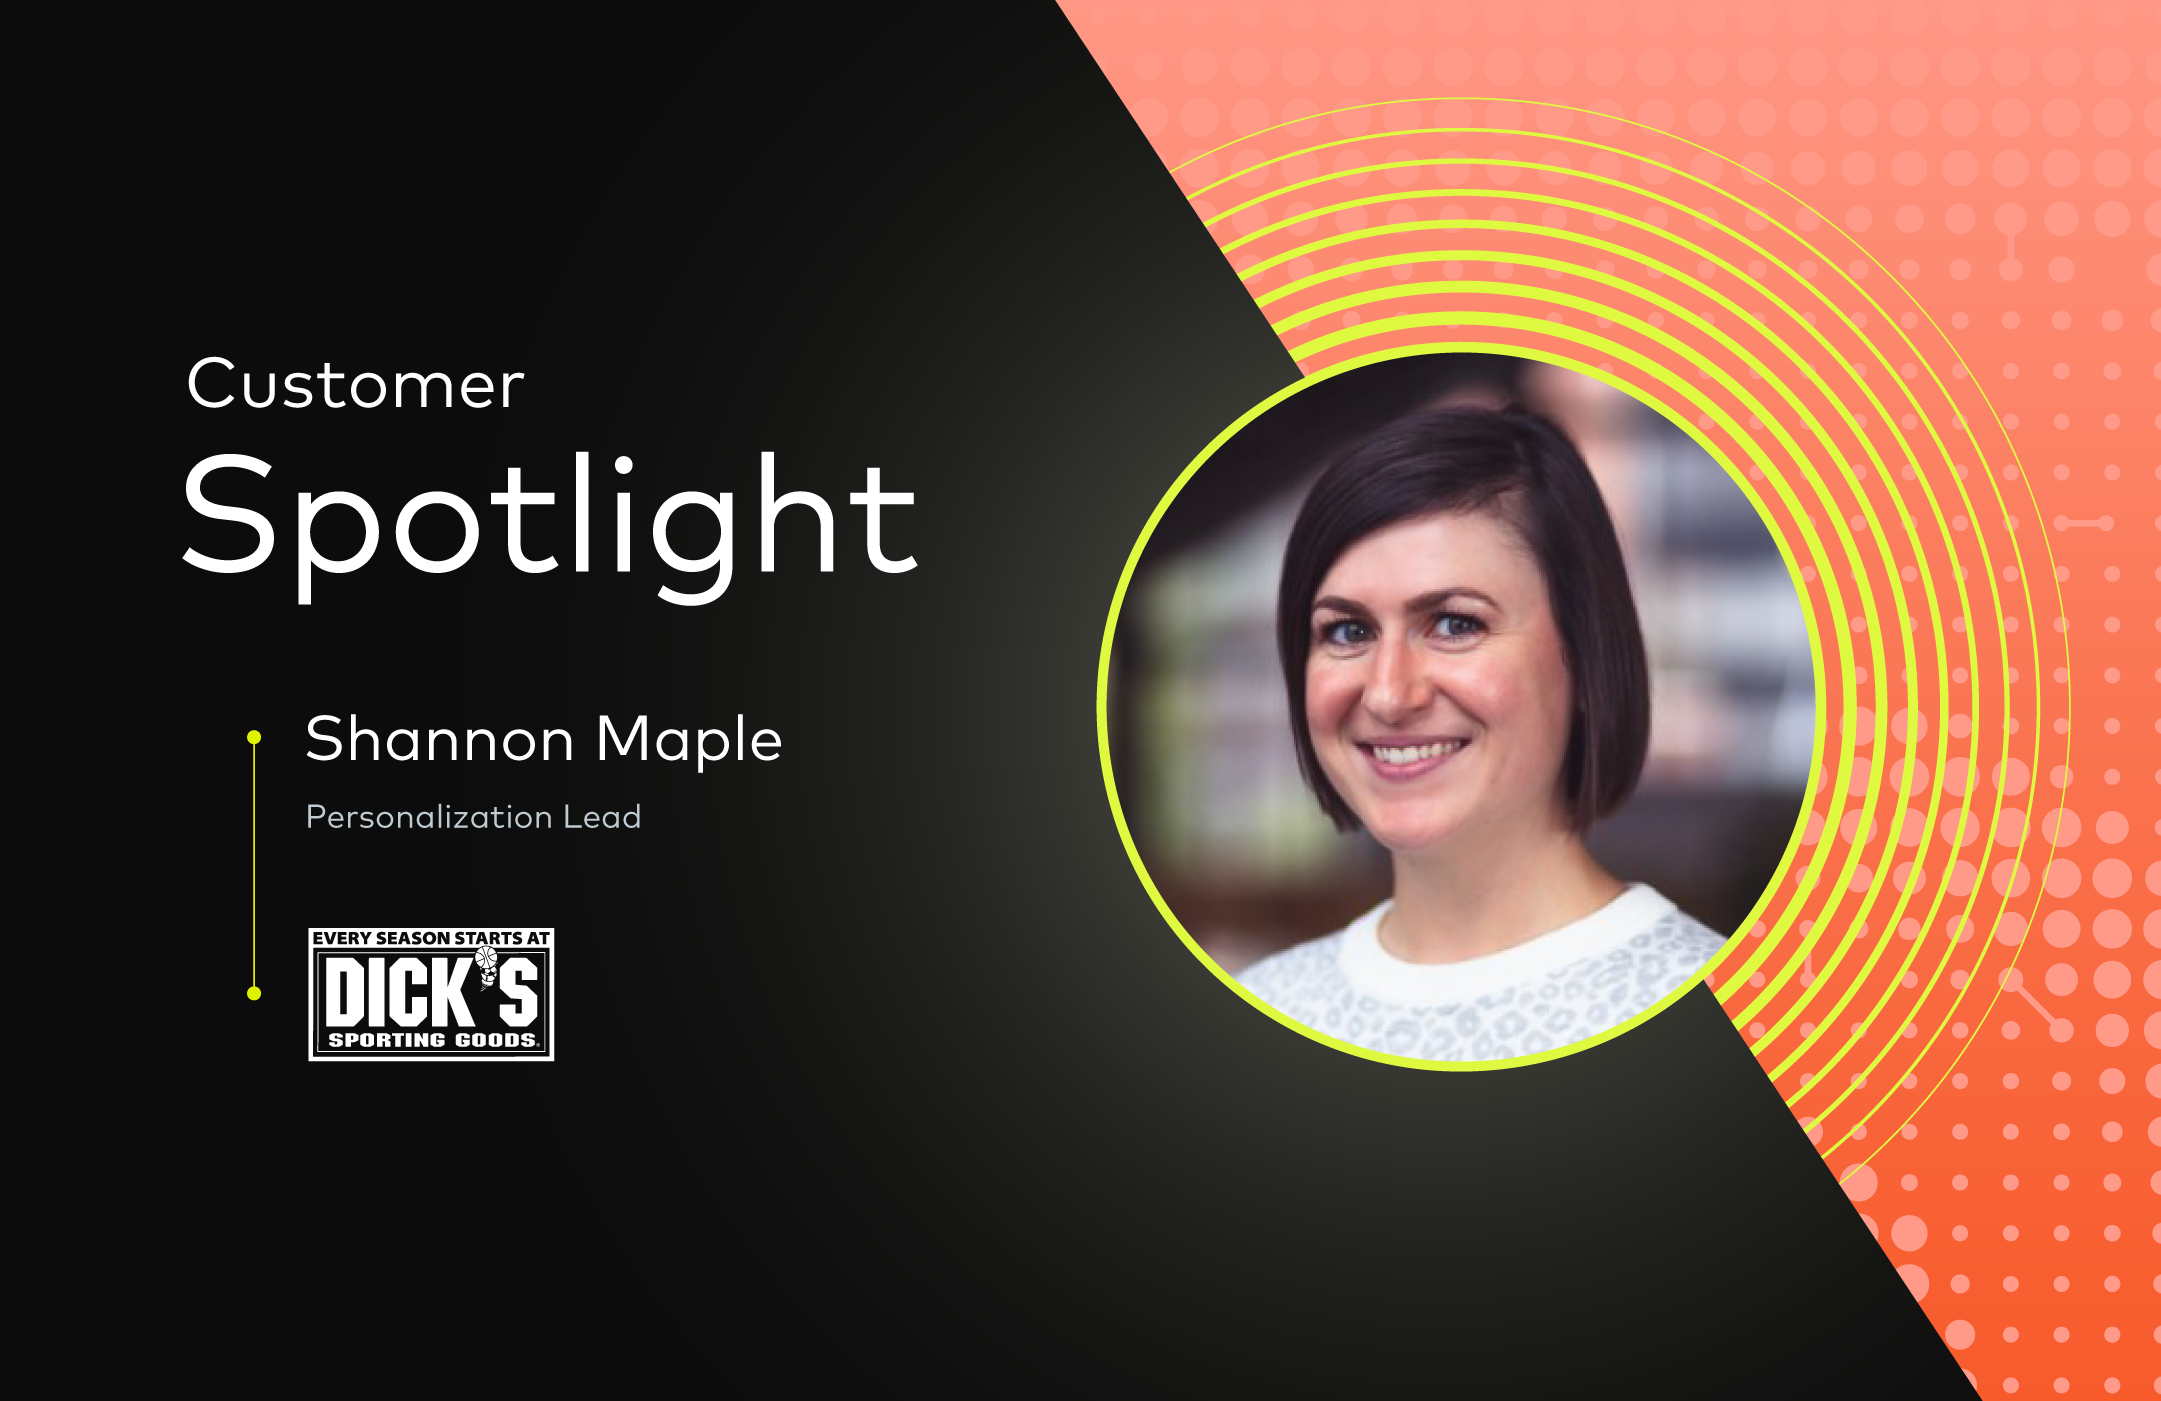 Hero image for customer spotlight featuring Shannon Maple, Personalization Lead from Dick's Sporting Goods